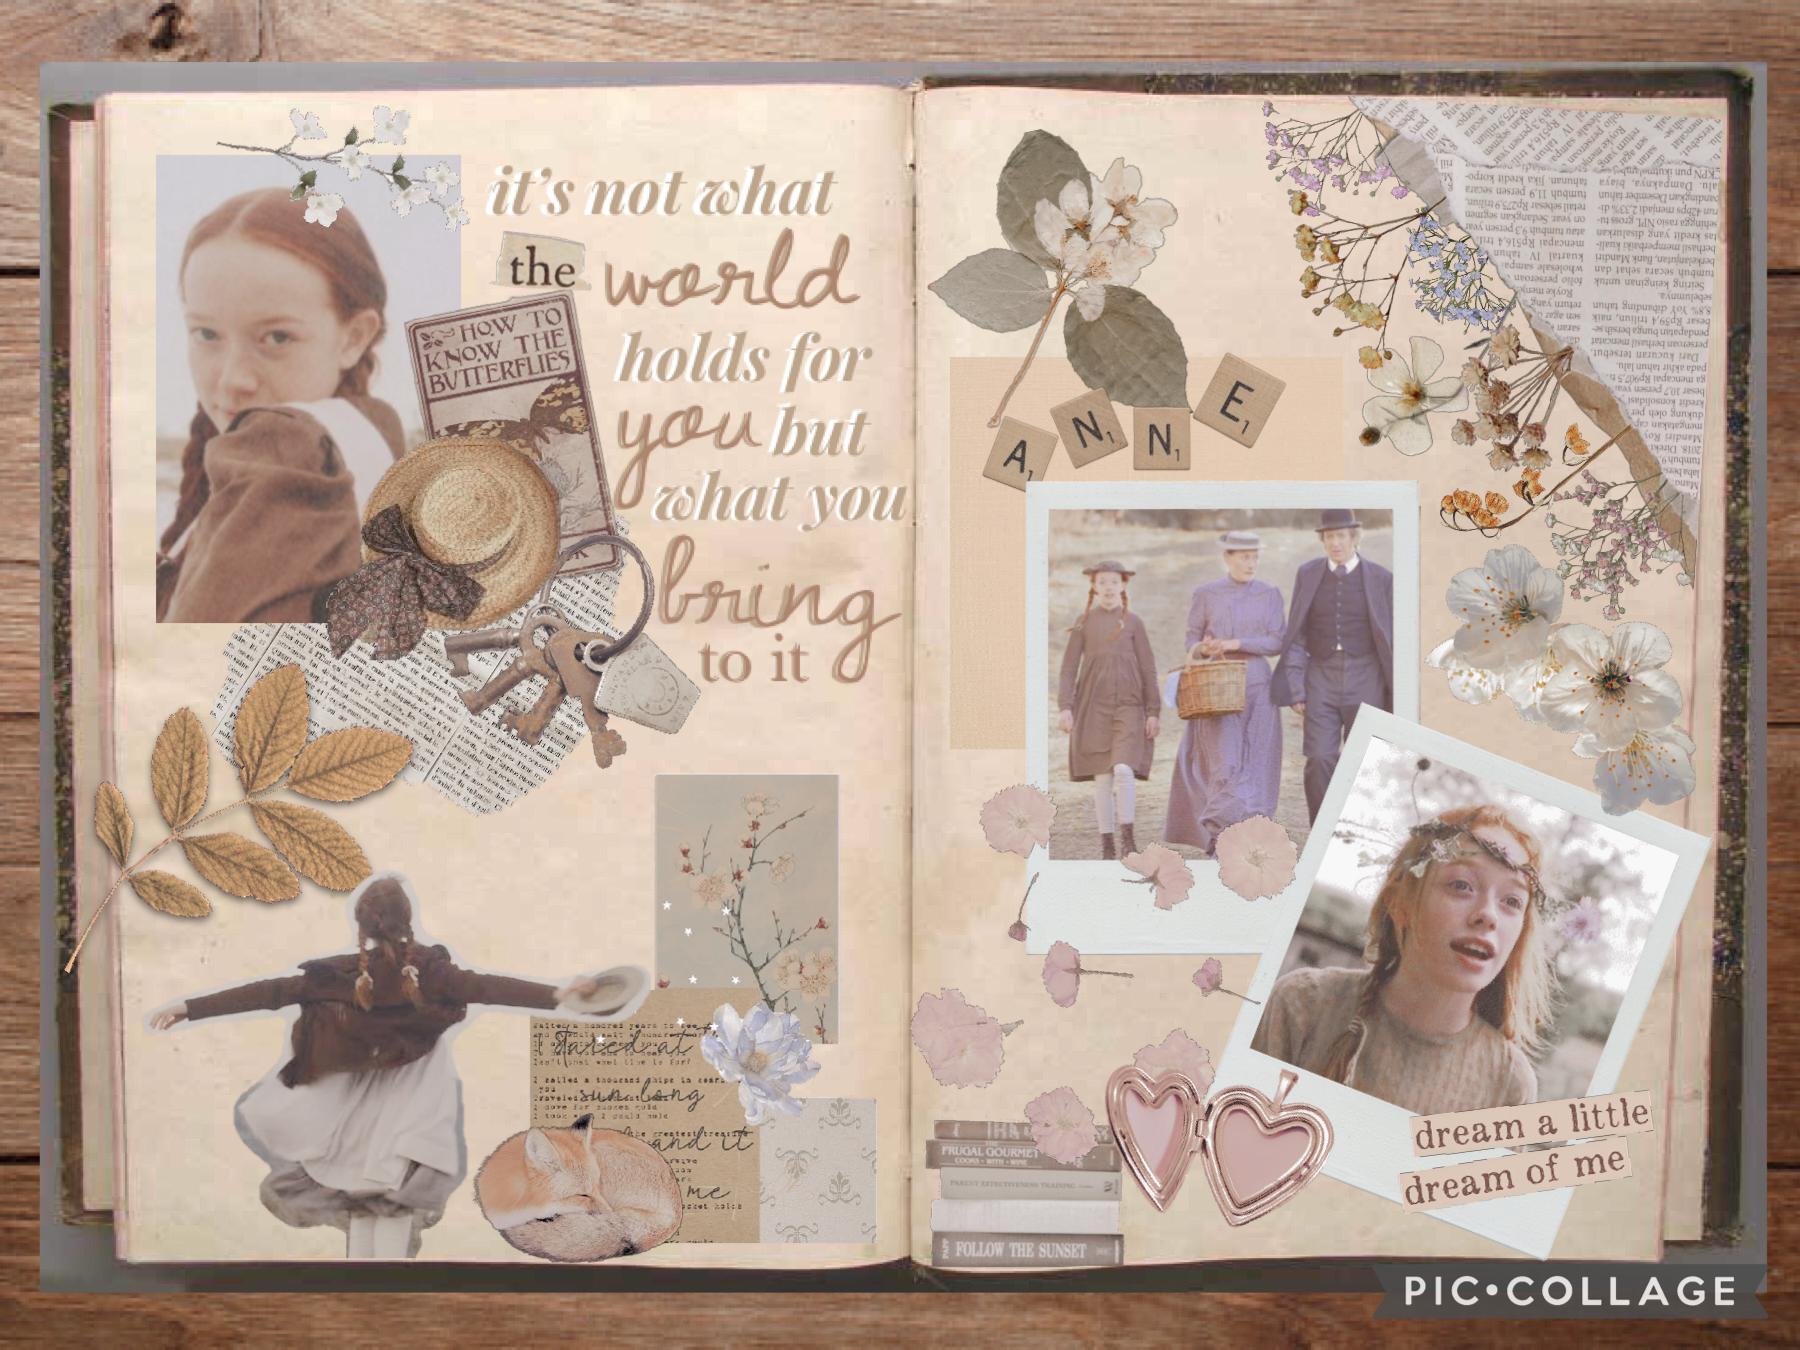 📔14/4/21📔
thought id try out the  vintage collage scrapbook style! What do y’all think? ✨📔